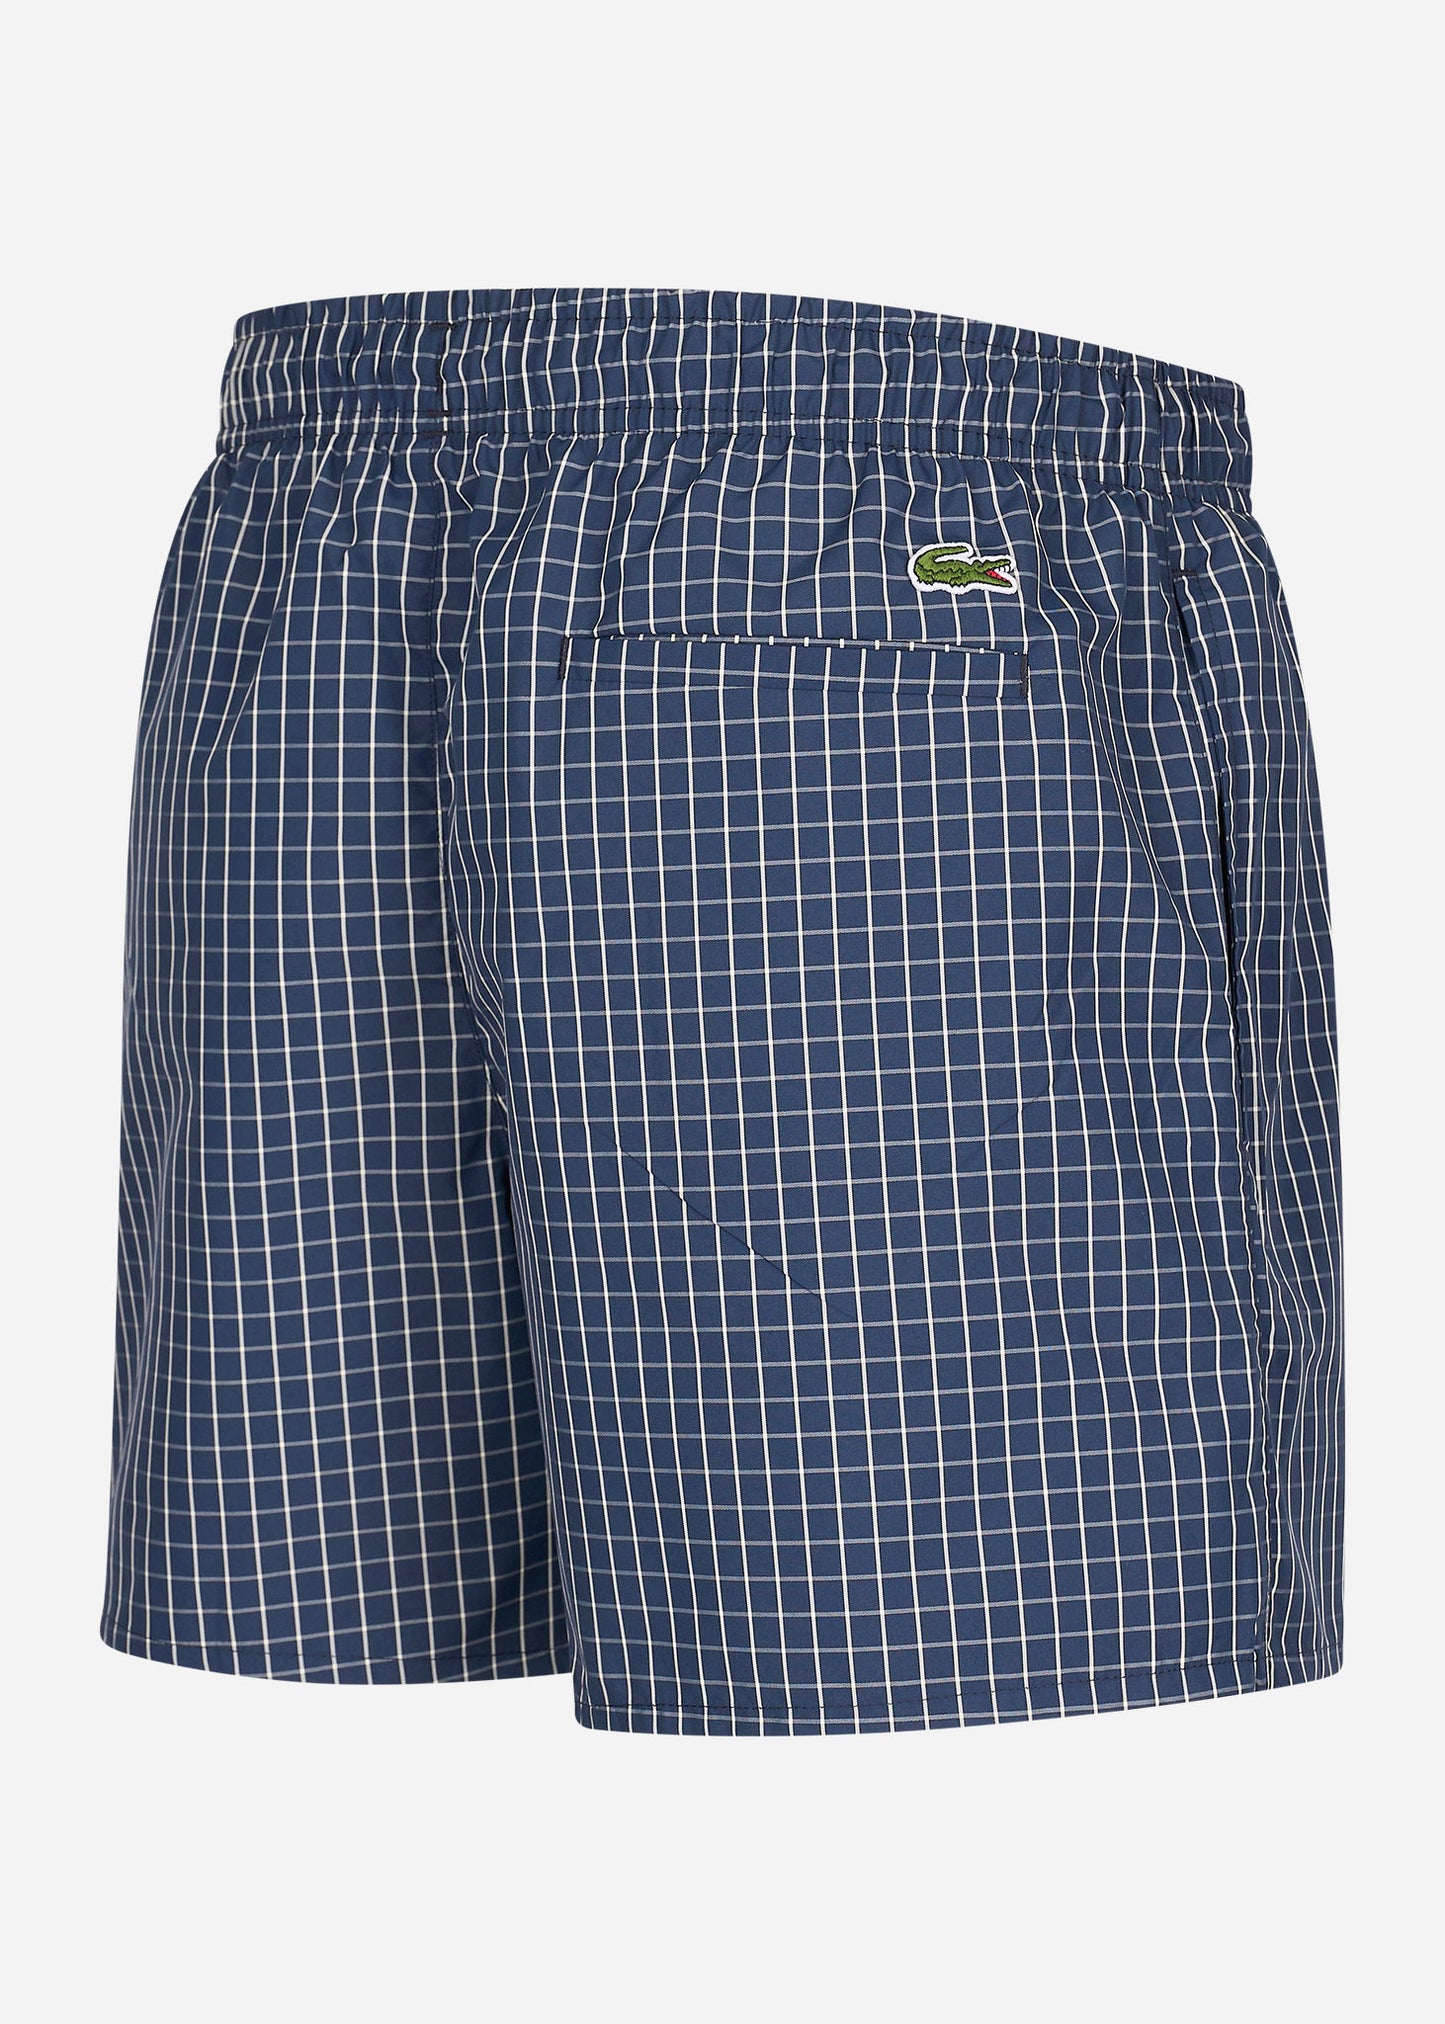 Checkered swimming trunks - navy blue lapland